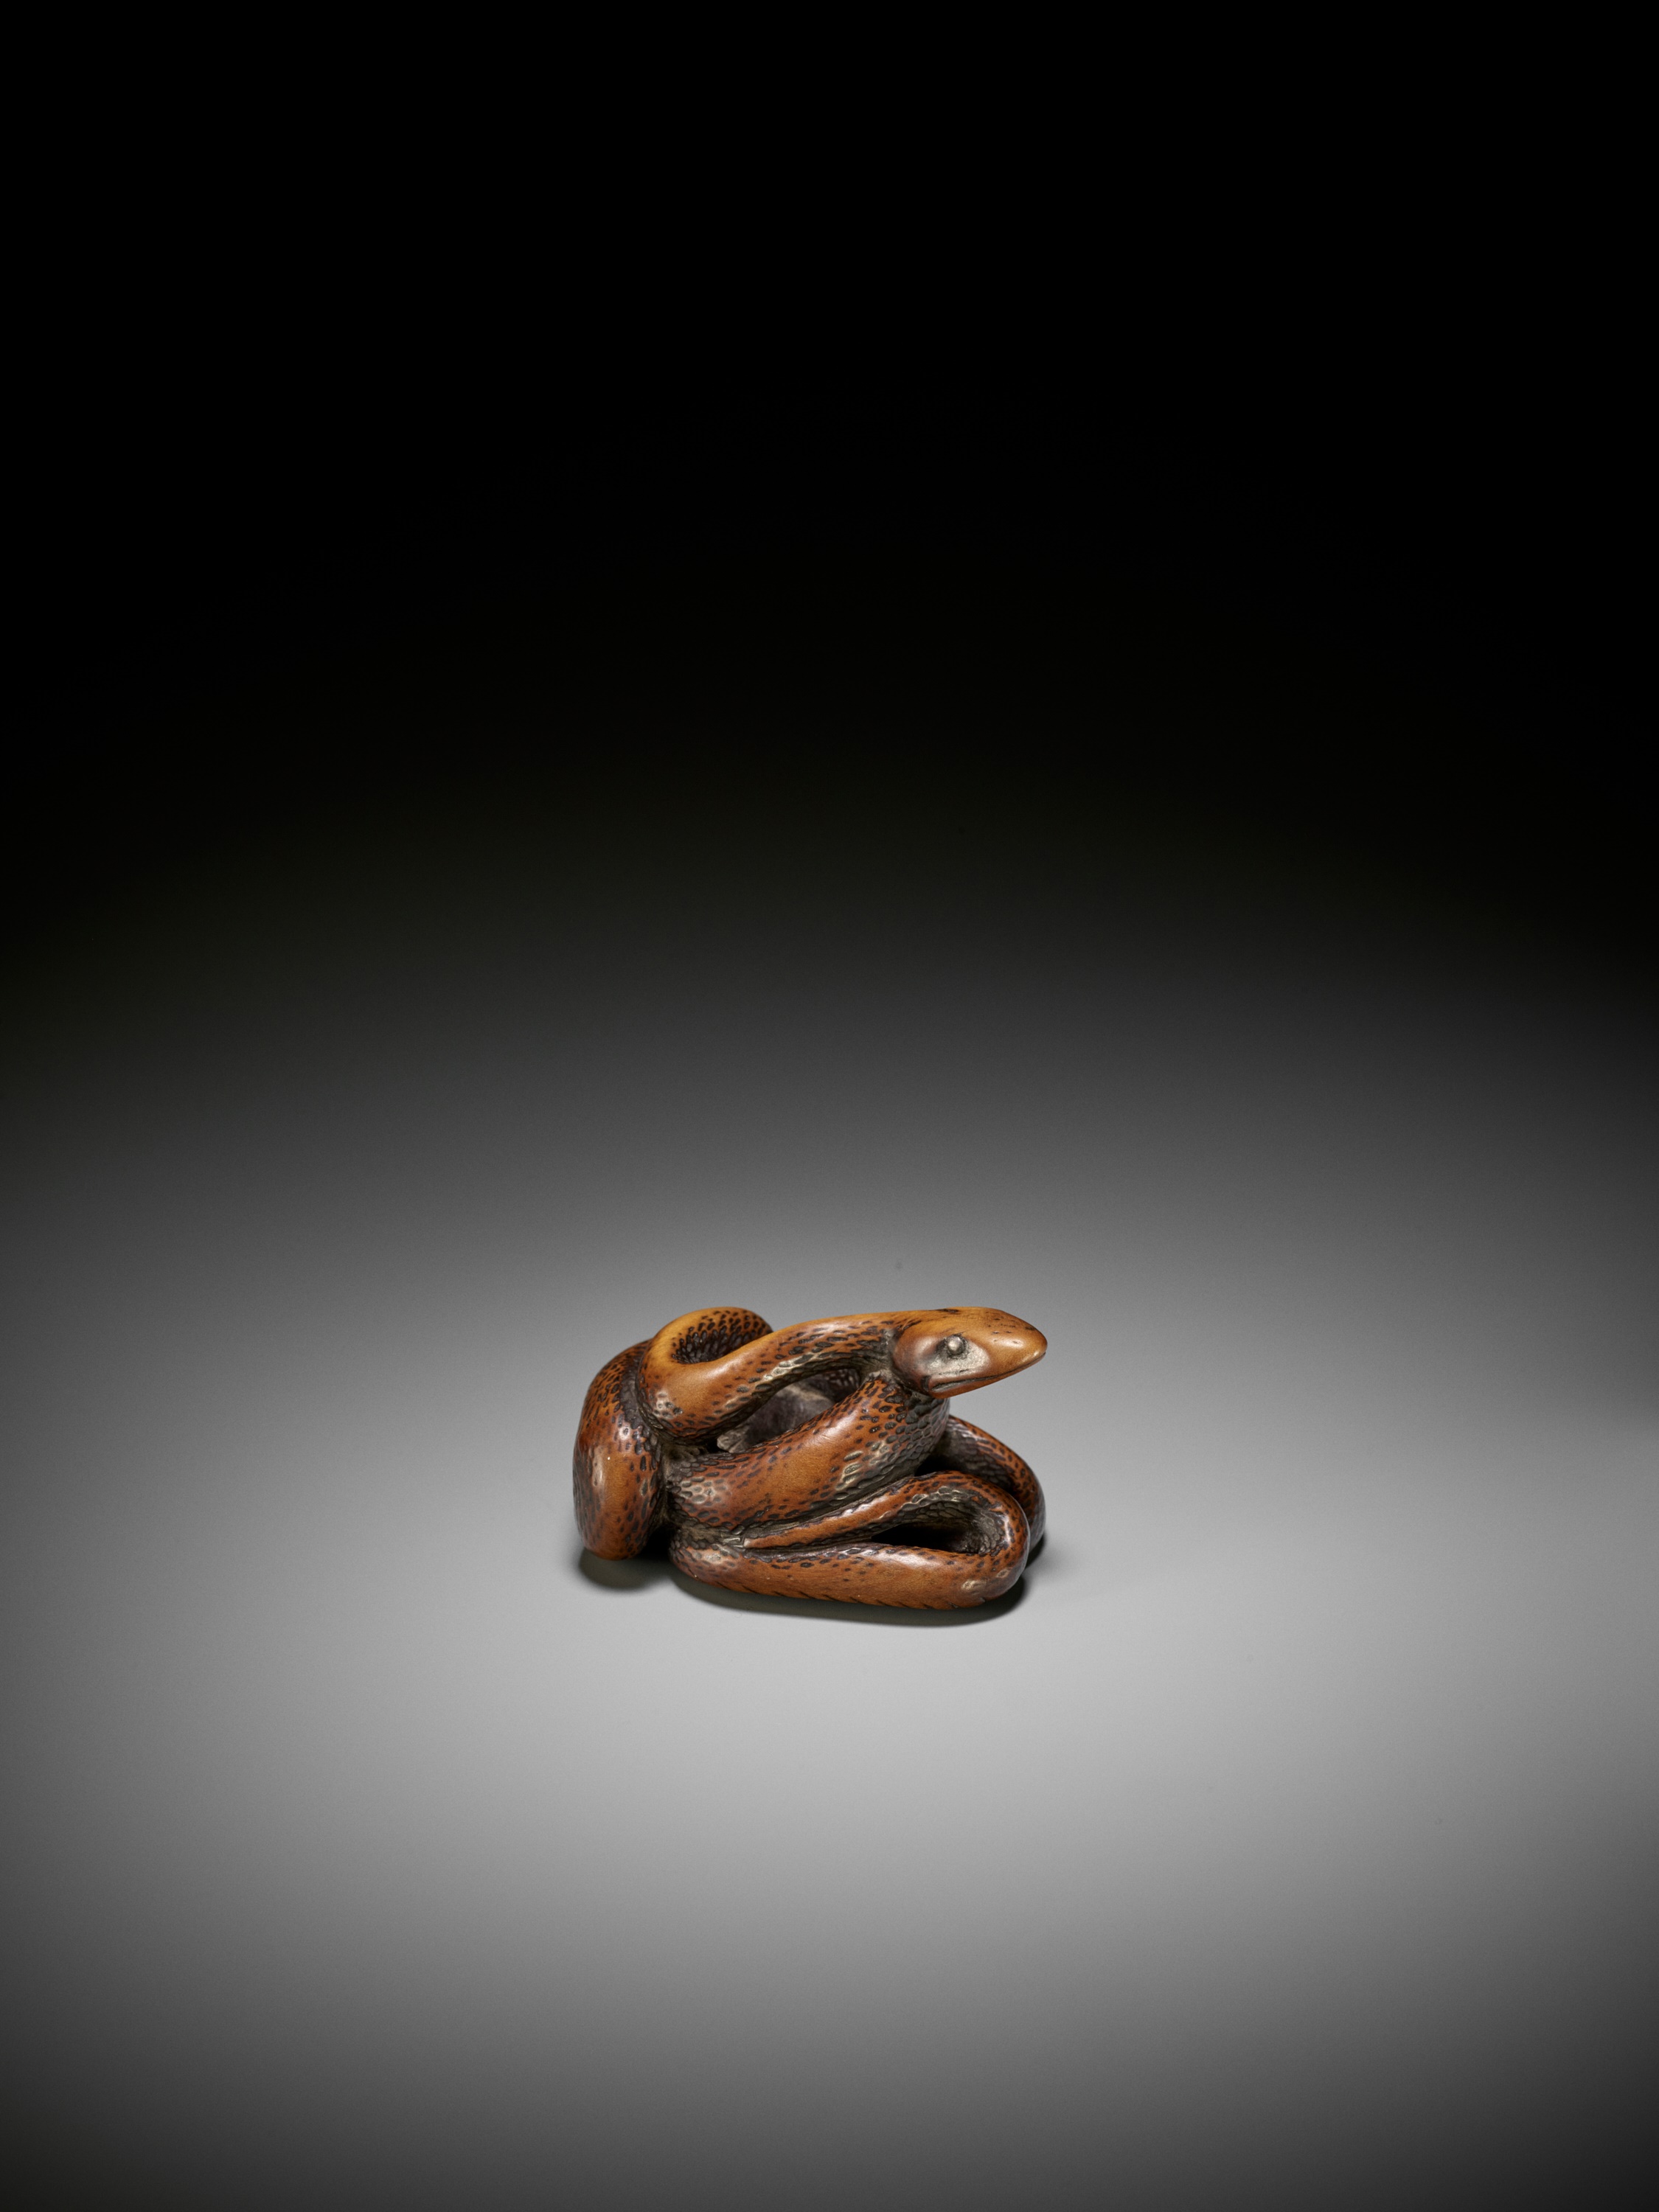 A LARGE AND POWERFUL WOOD NETSUKE OF A COILED SNAKE - Image 4 of 10